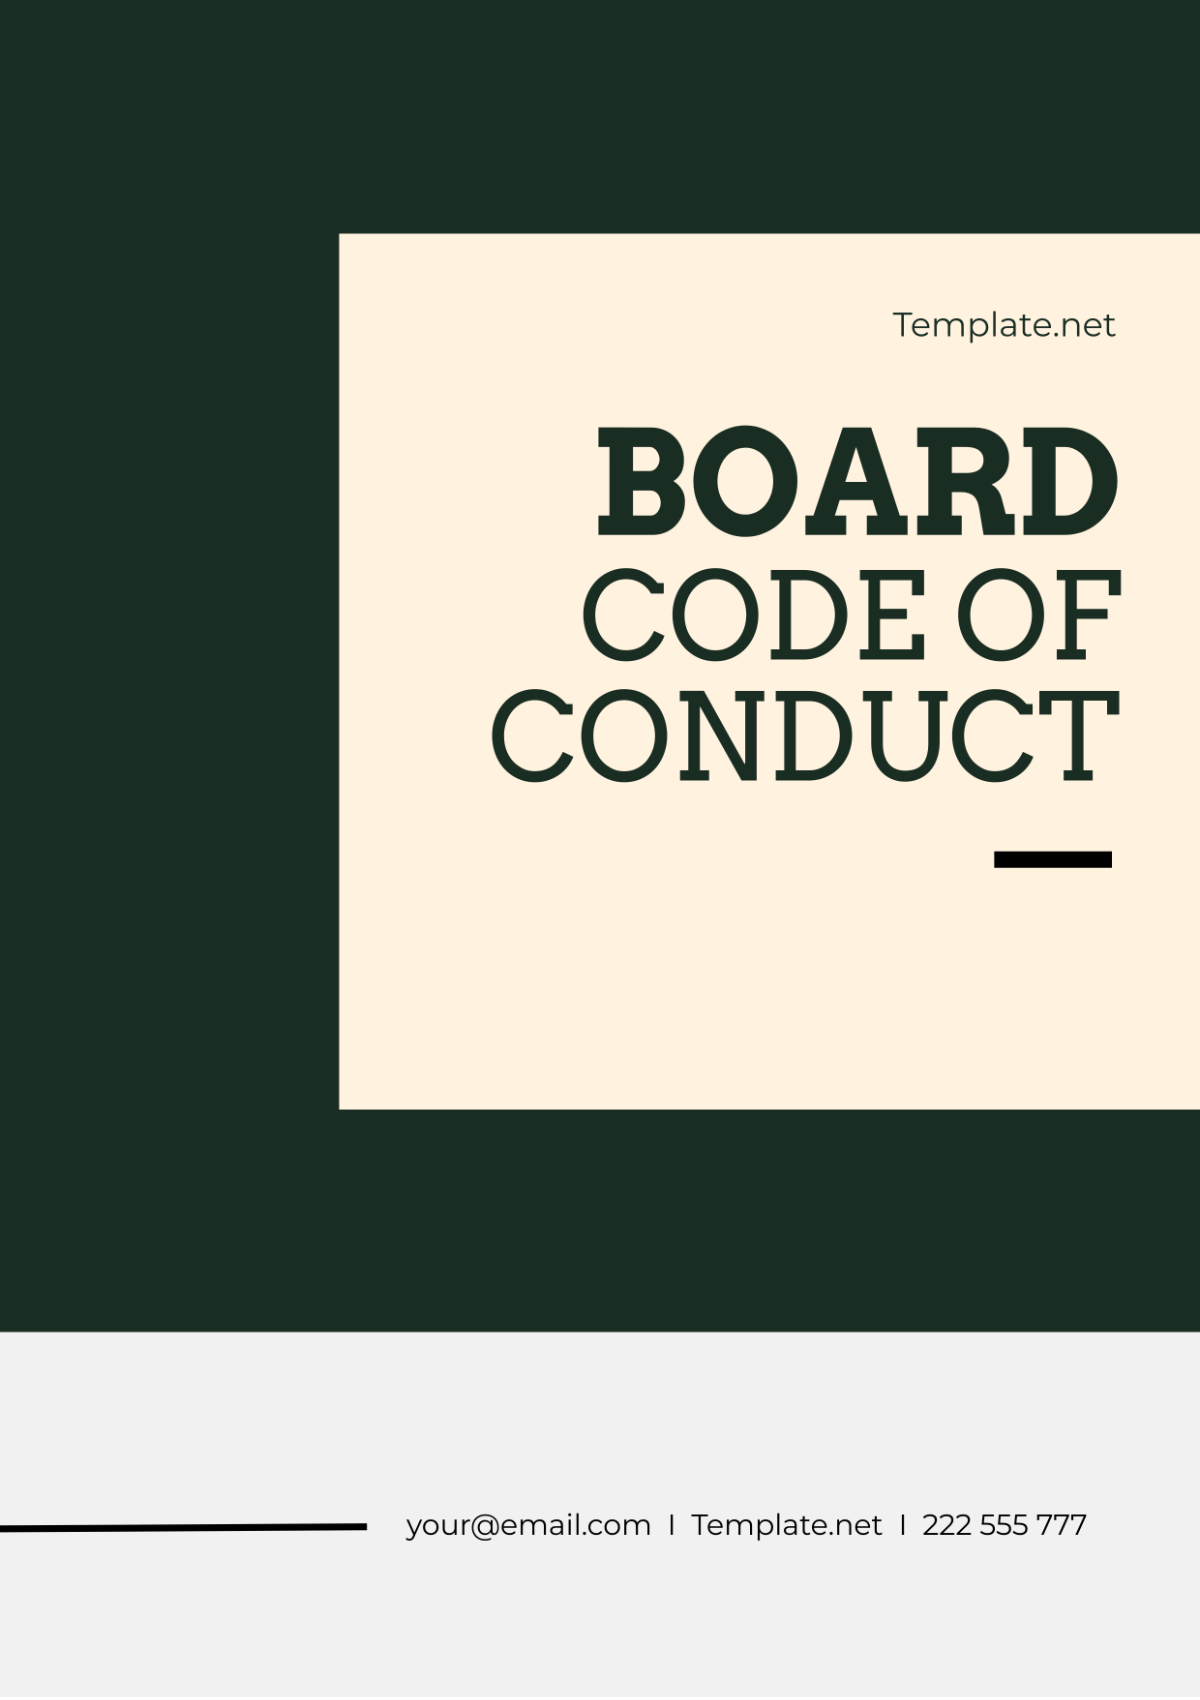 Board Code of Conduct Template